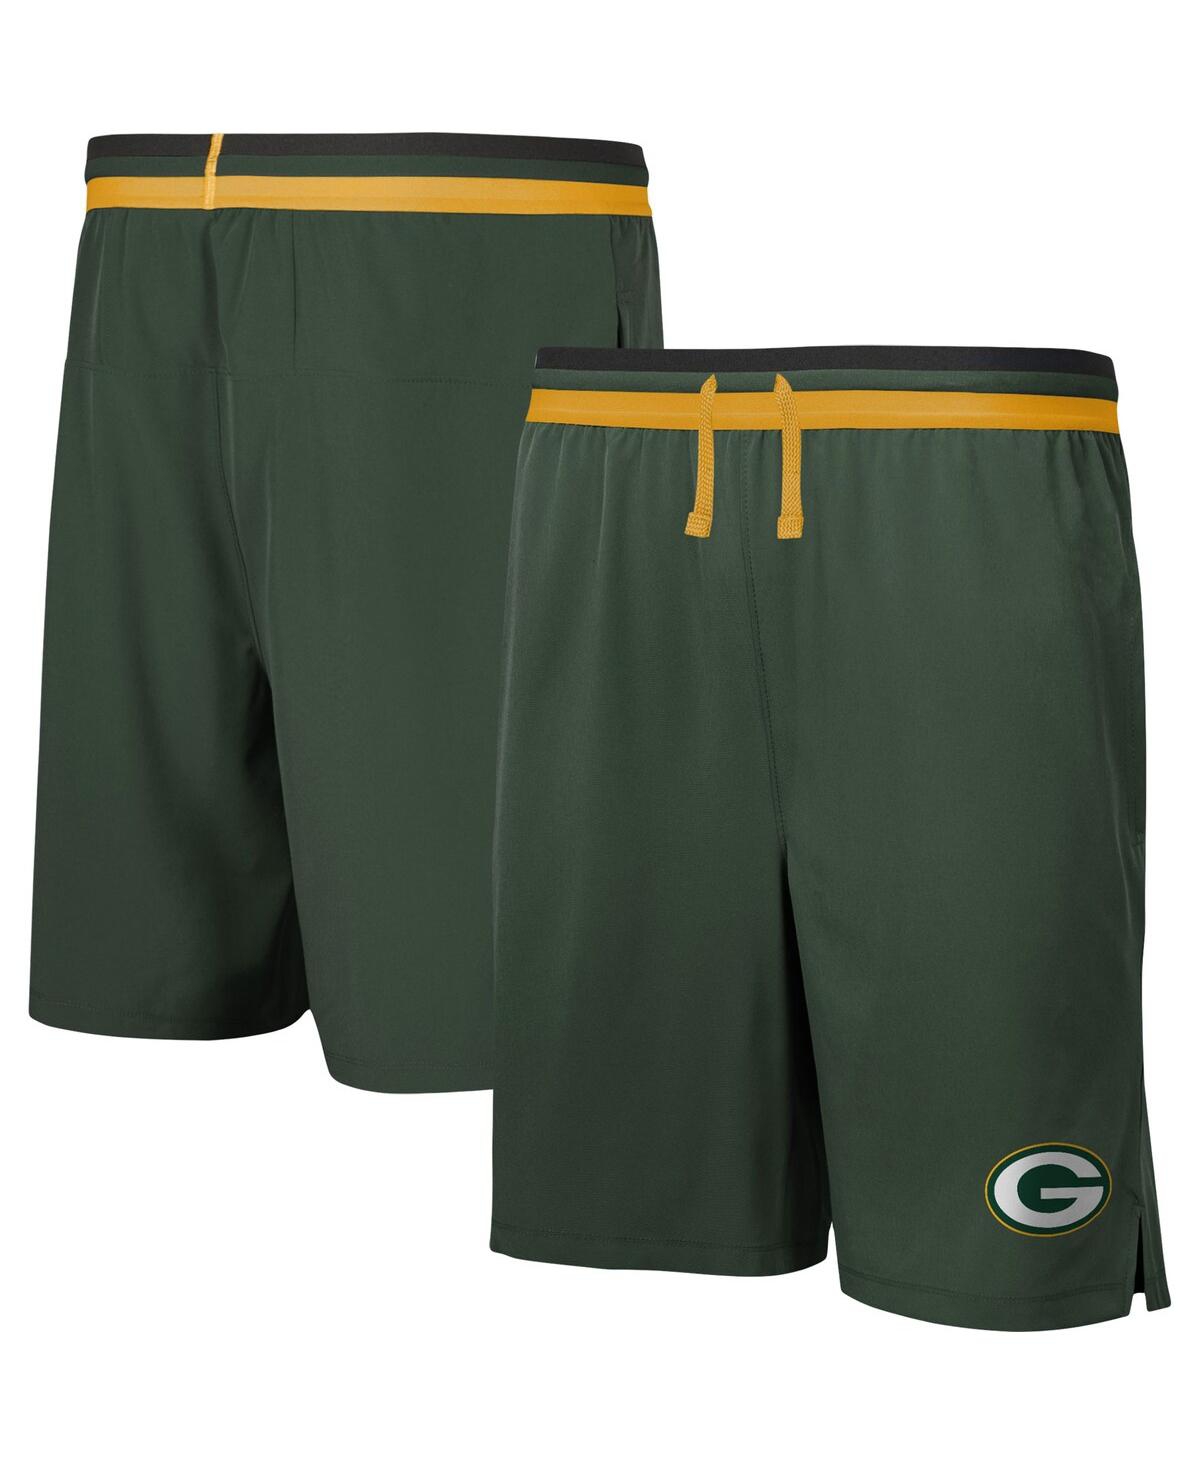 Men's Green Green Bay Packers Cool Down Tri-Color Elastic Training Shorts - Green